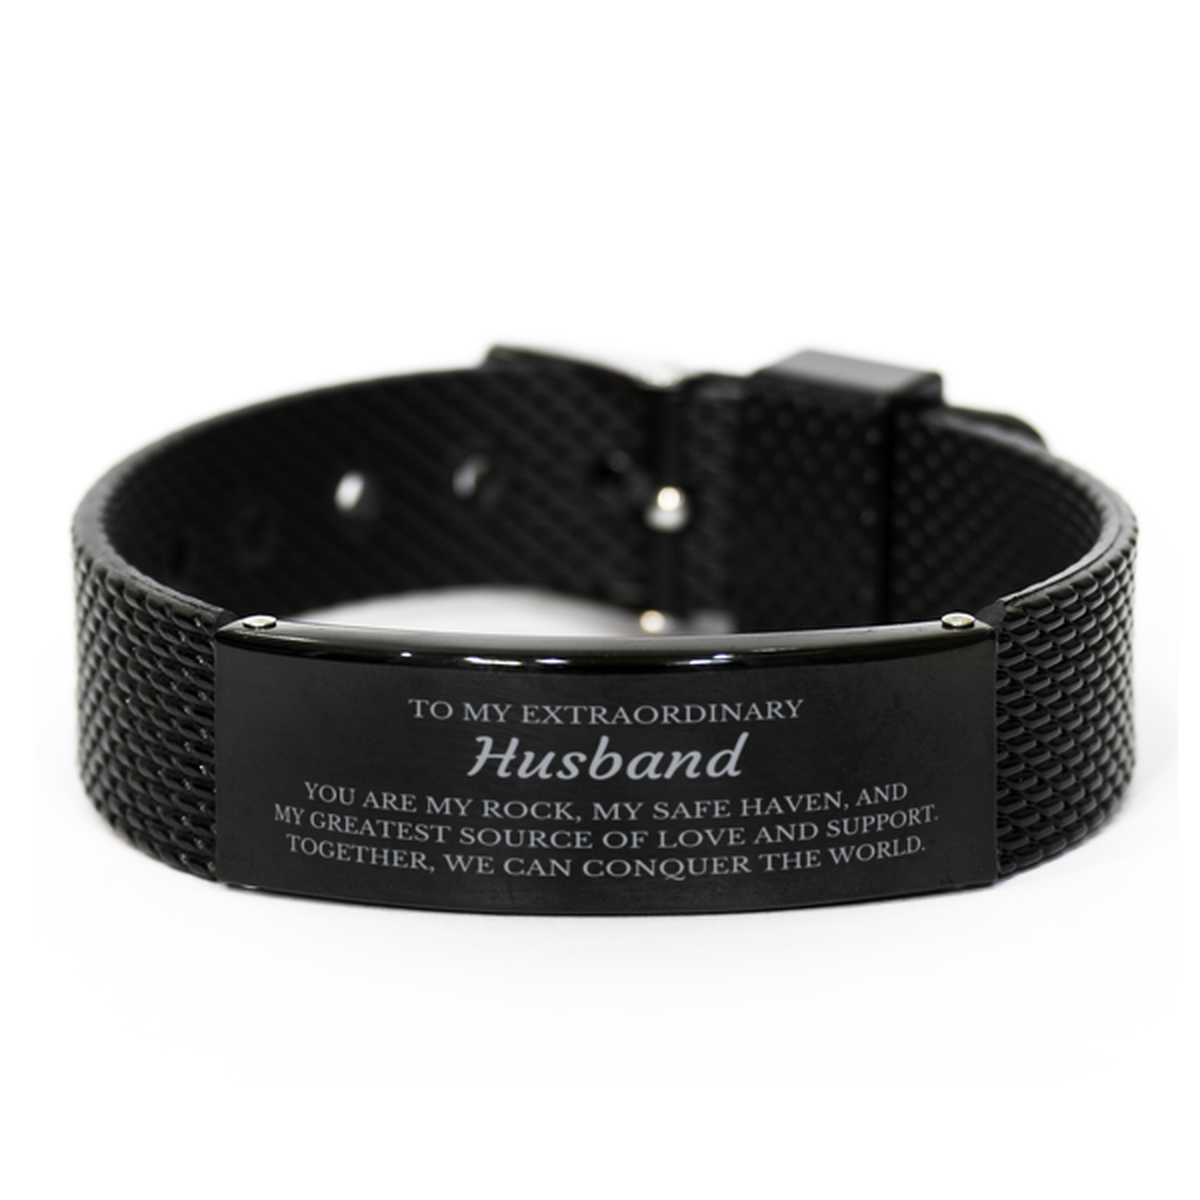 To My Extraordinary Husband Gifts, Together, we can conquer the world, Birthday Black Shark Mesh Bracelet For Husband, Christmas Gifts For Husband